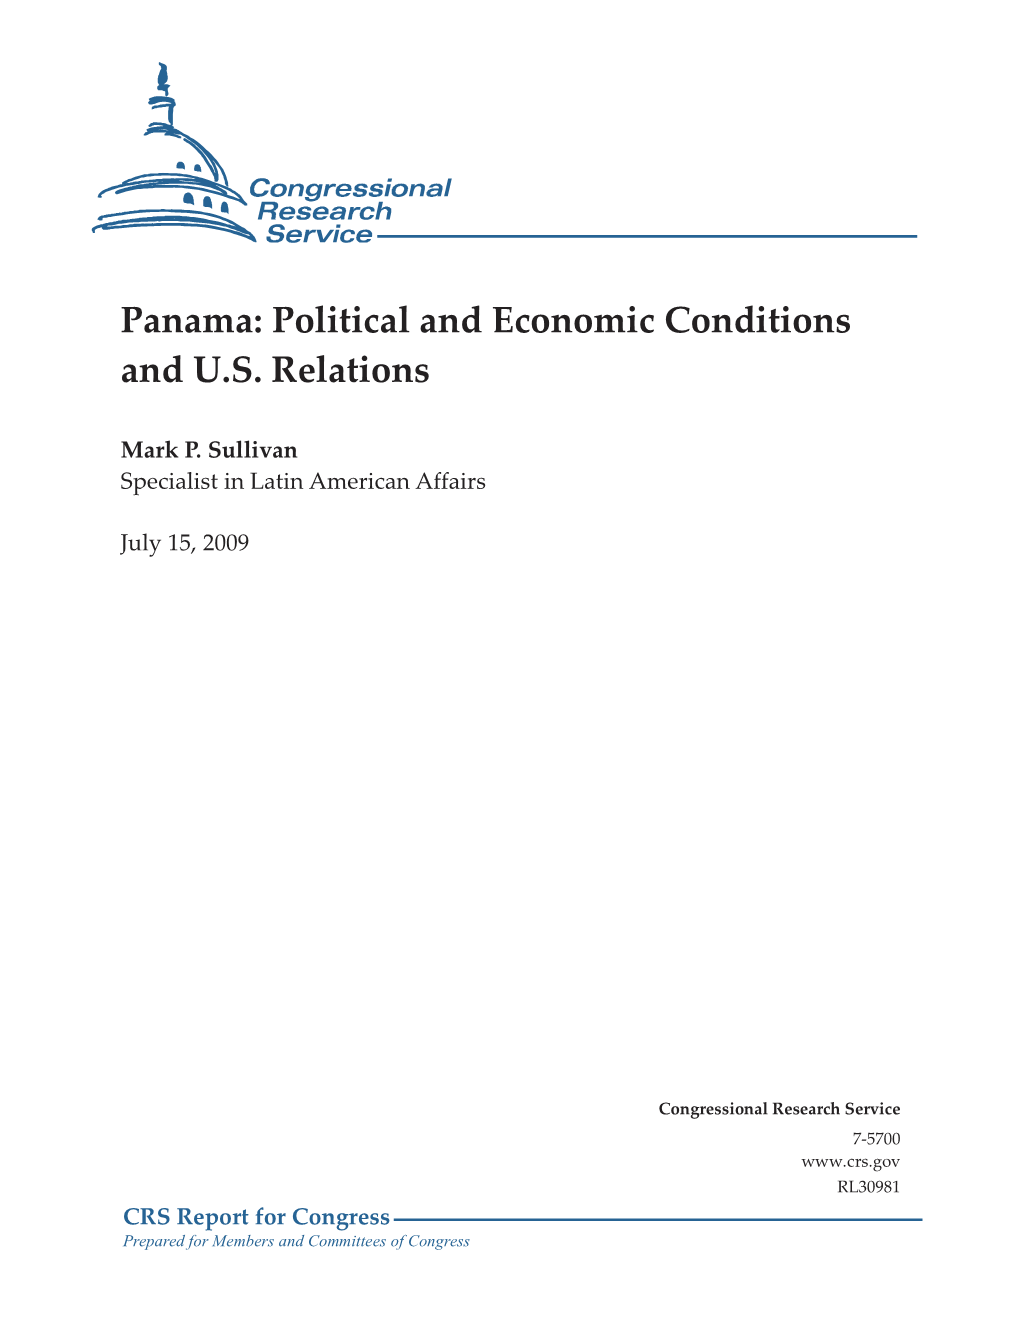 Panama: Political and Economic Conditions and U.S